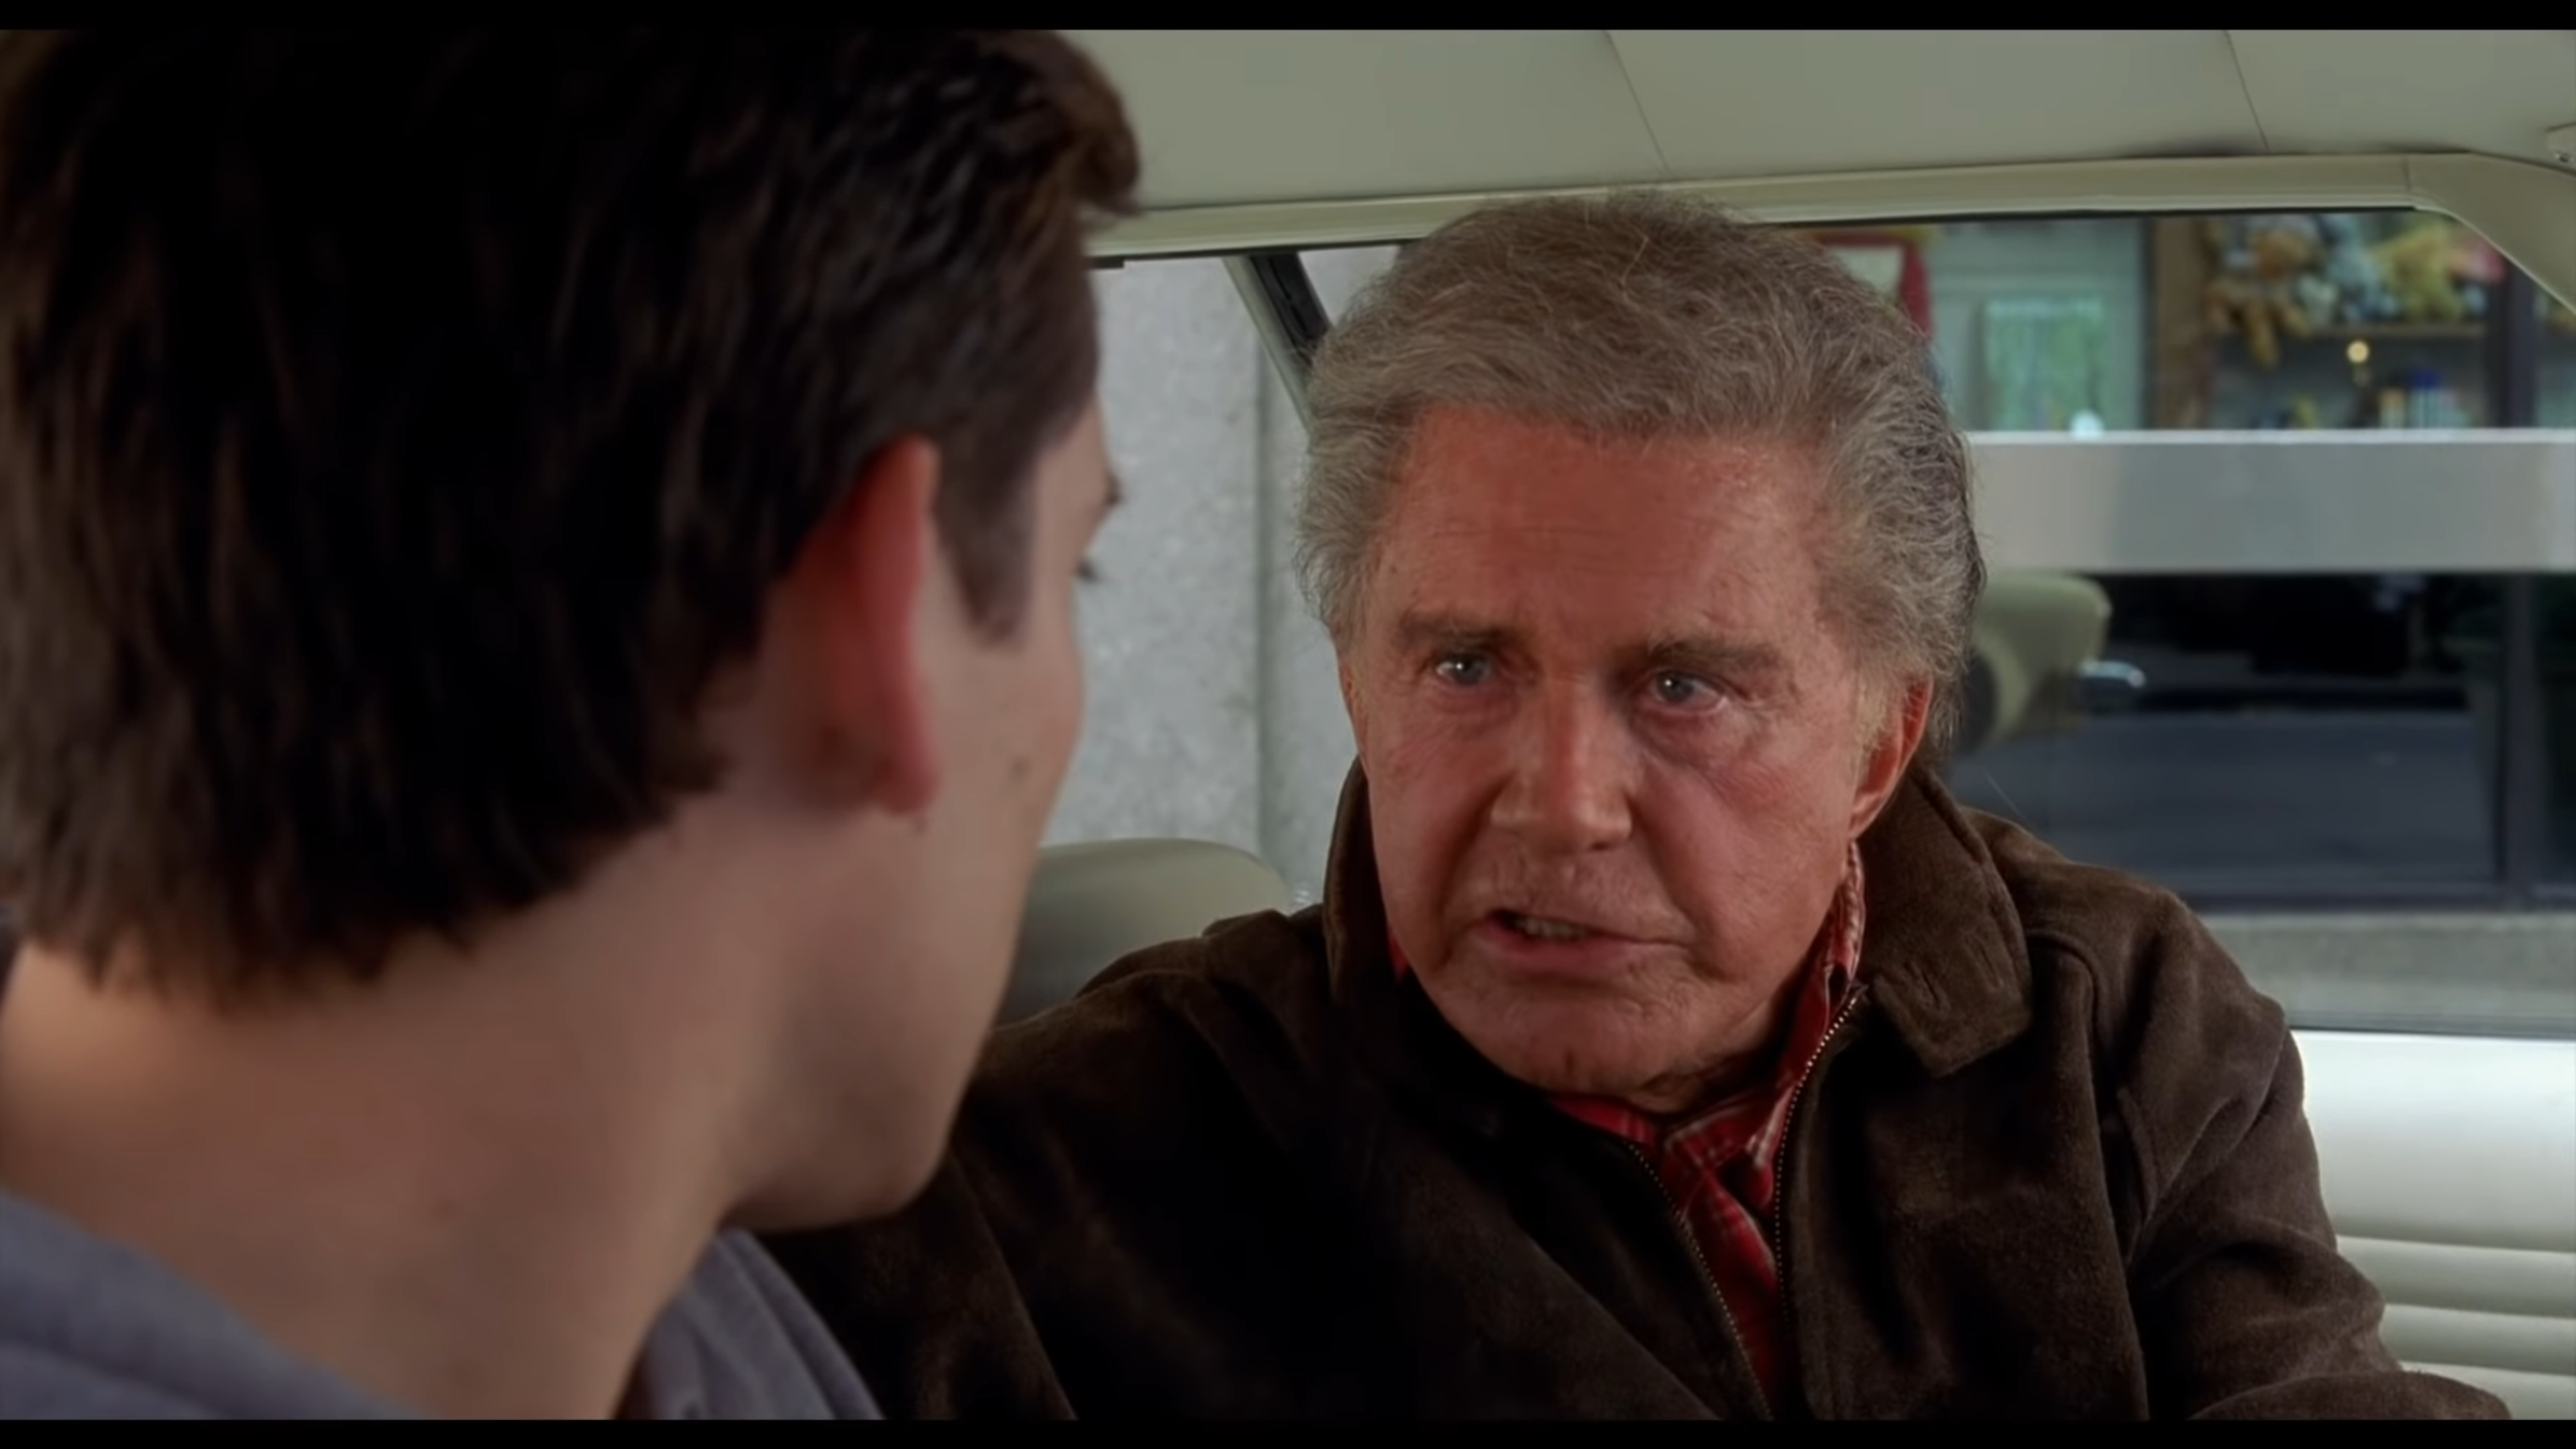 Uncle Ben delivering the famous quote to Peter